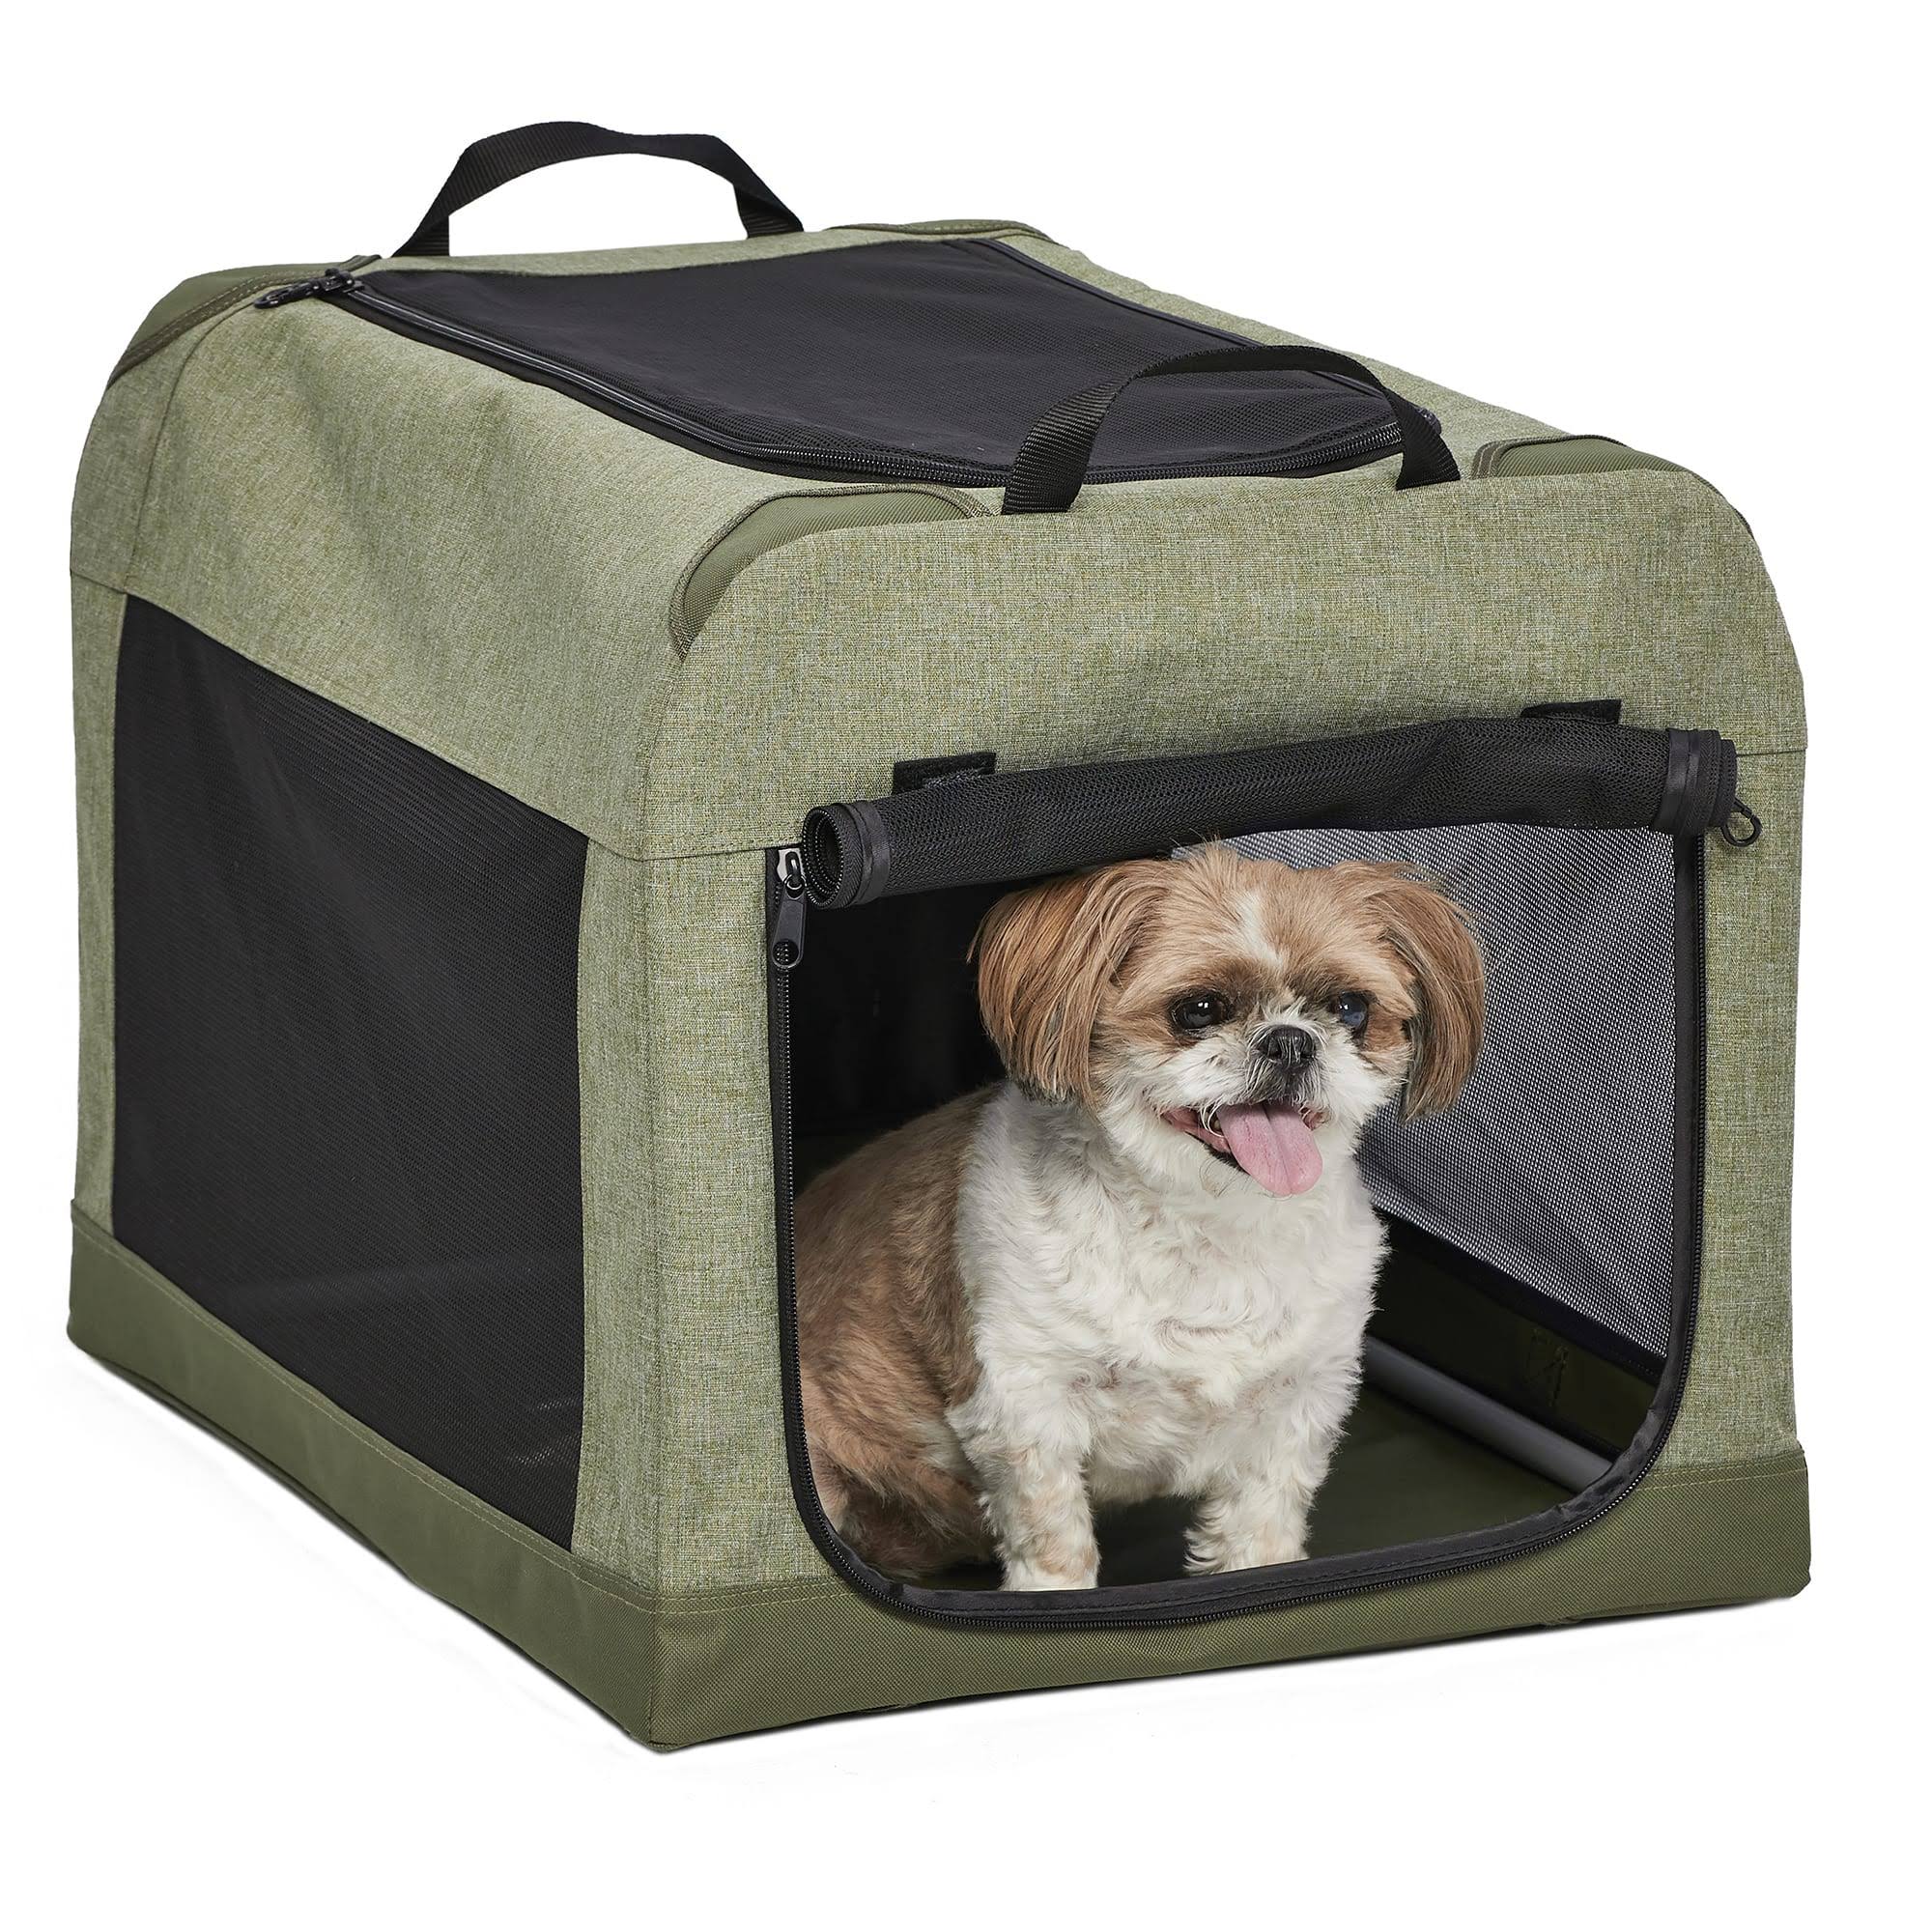 Midwest Canine Camper Dog Tent Crate, Green, Small